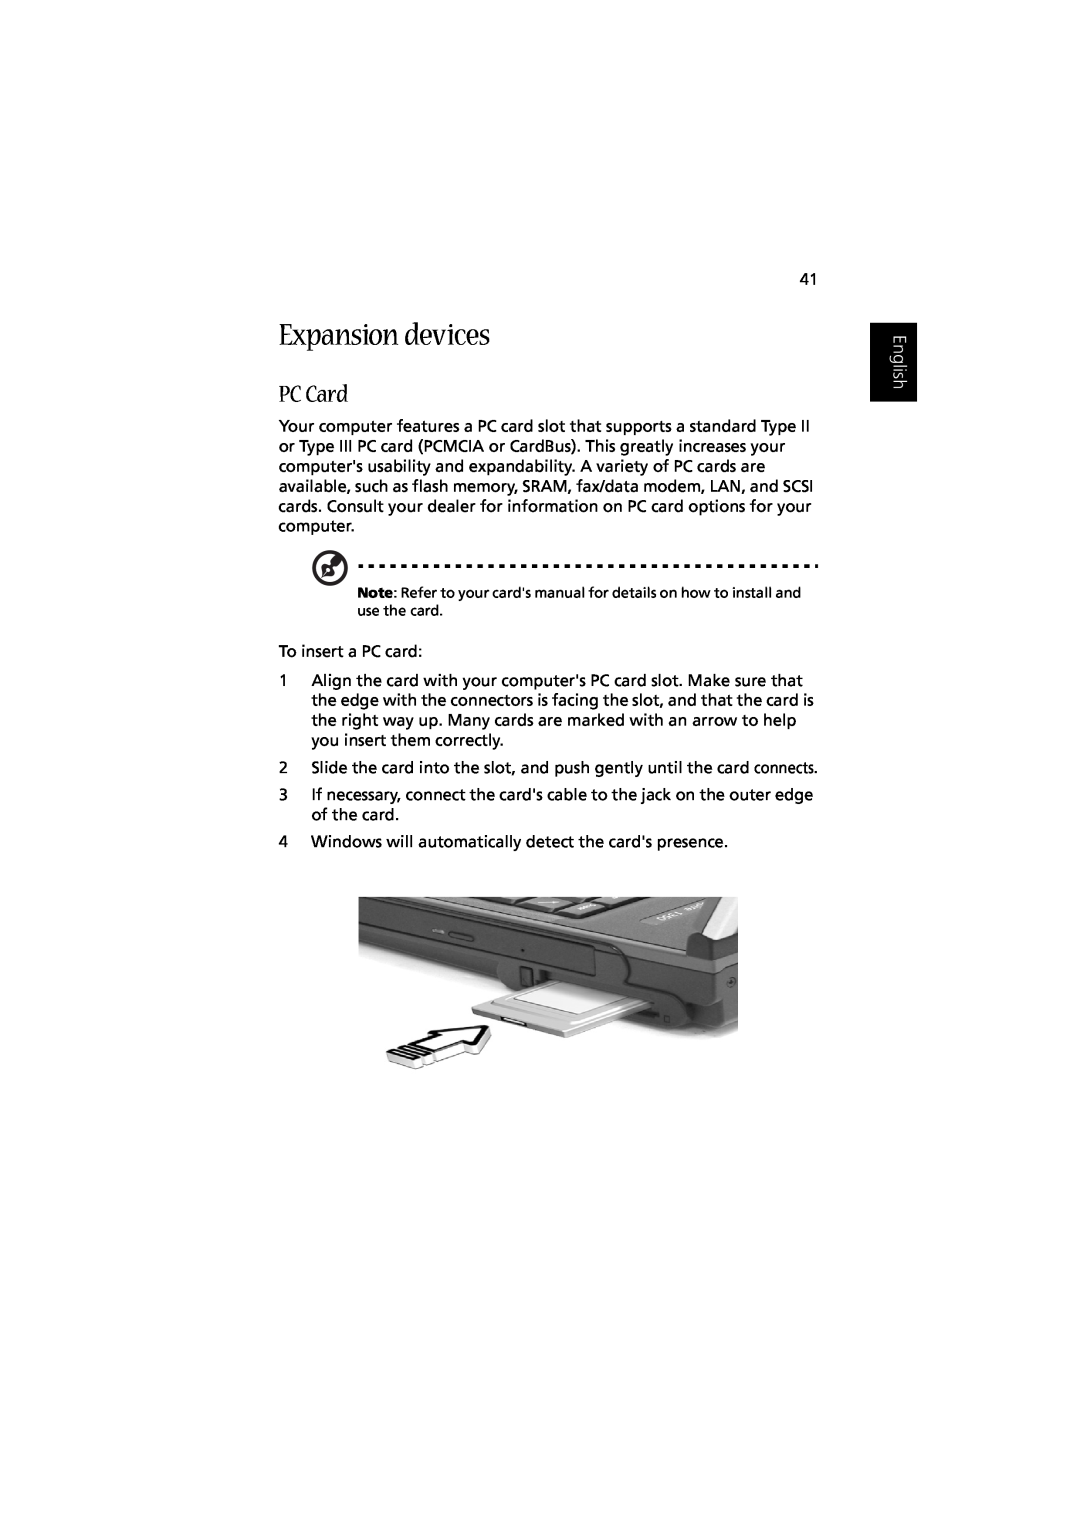 Acer Aspire 1350 manual Expansion devices, PC Card, English 